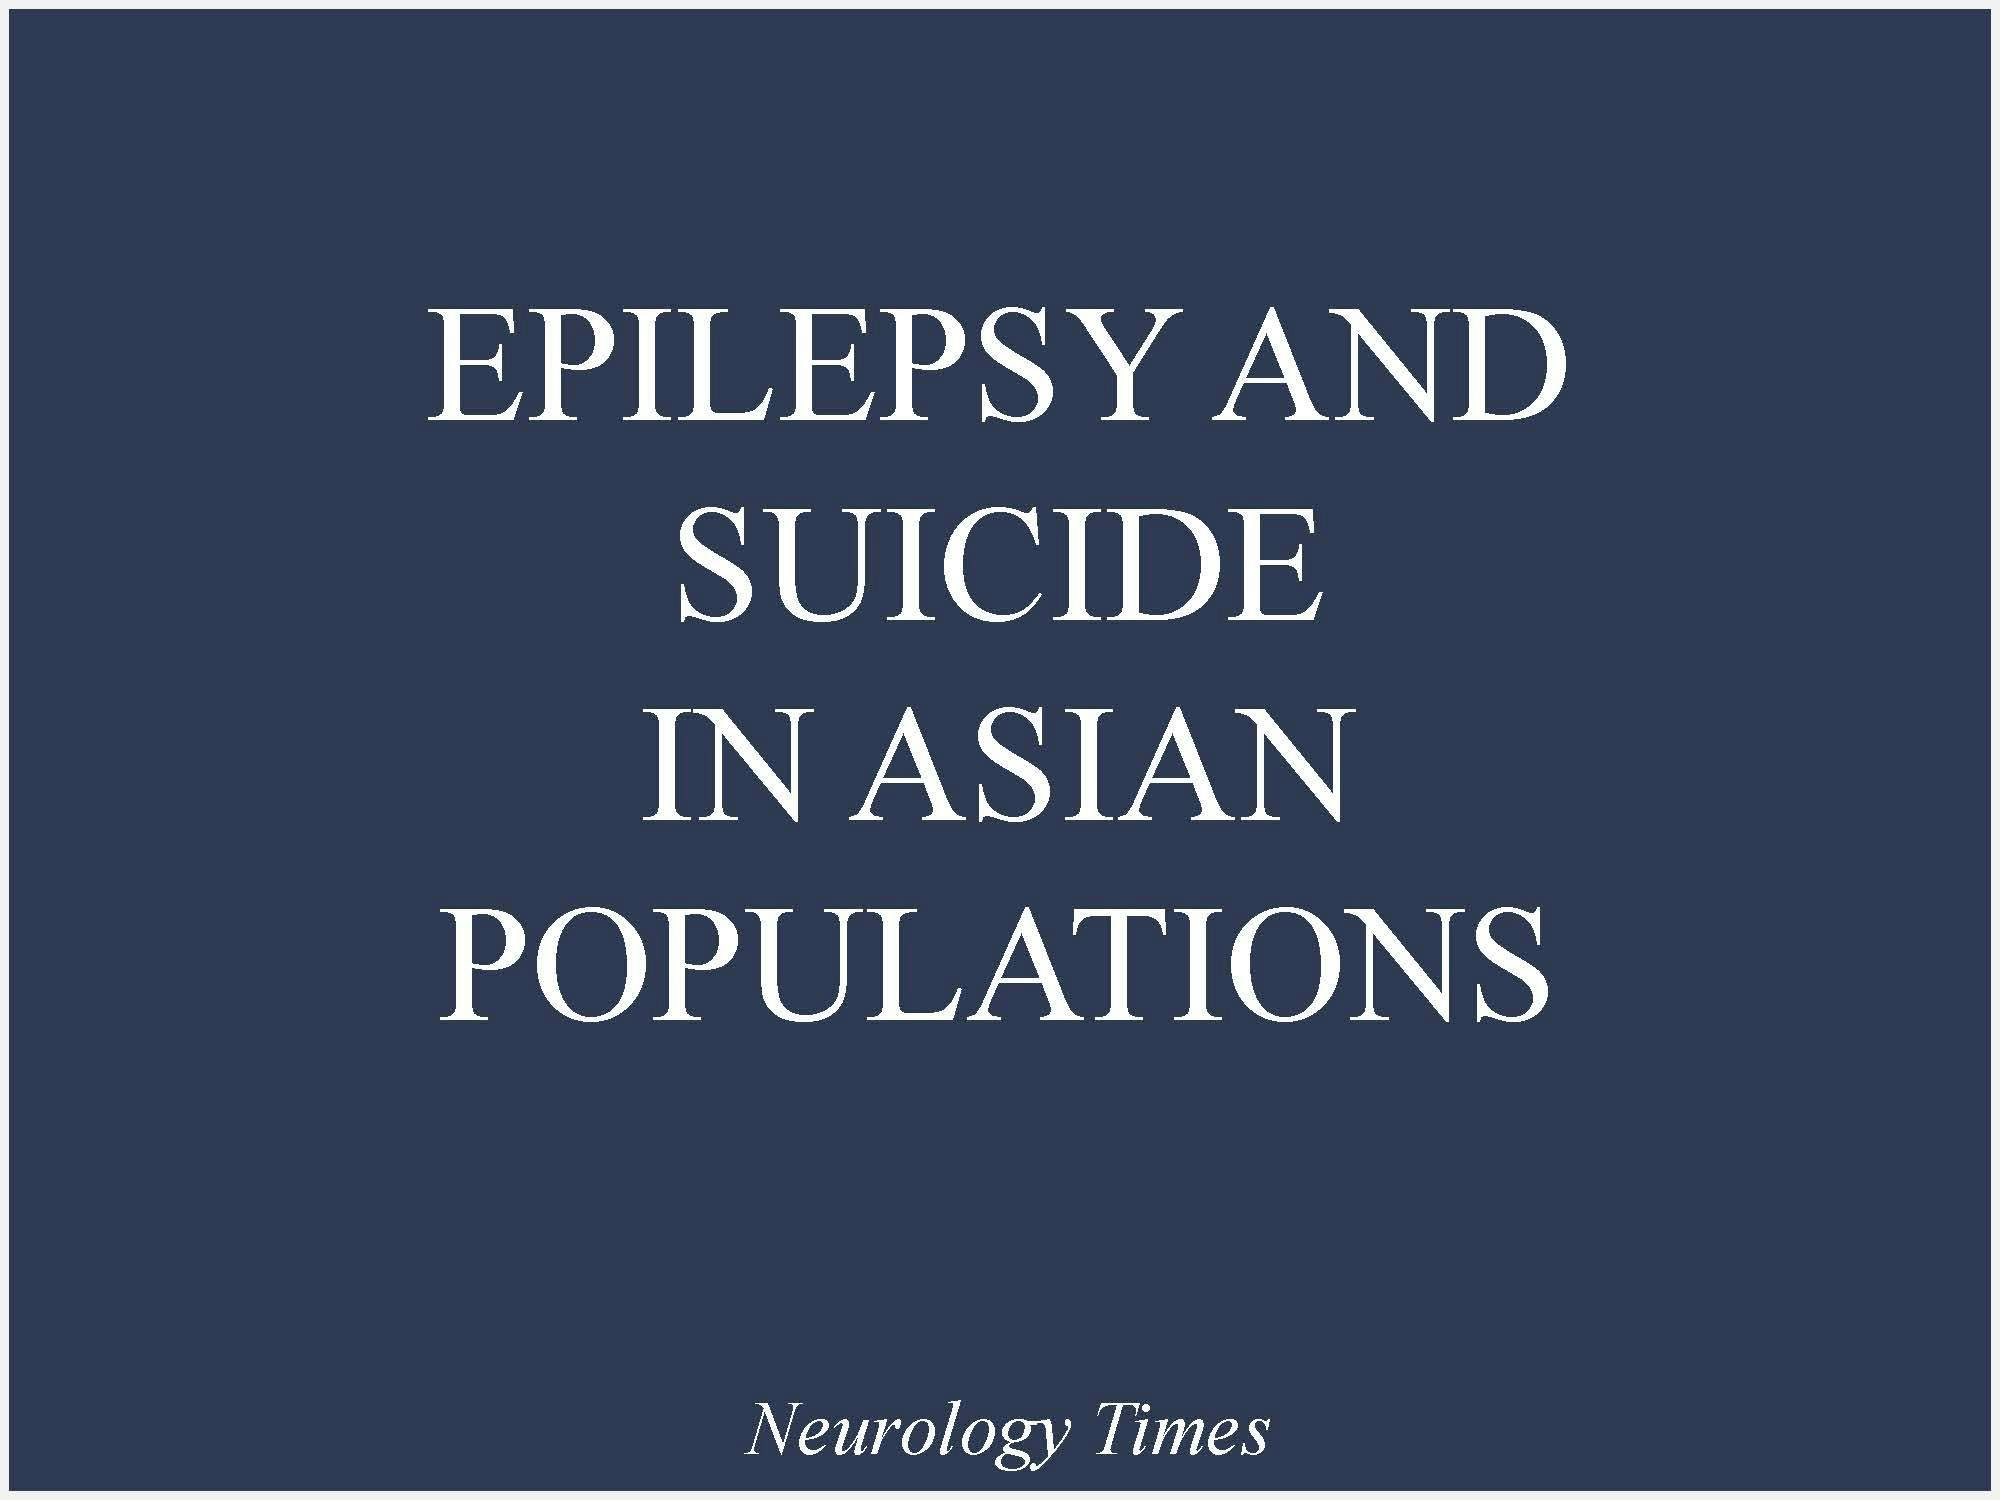 Epilepsy and Suicide in Asian Populations